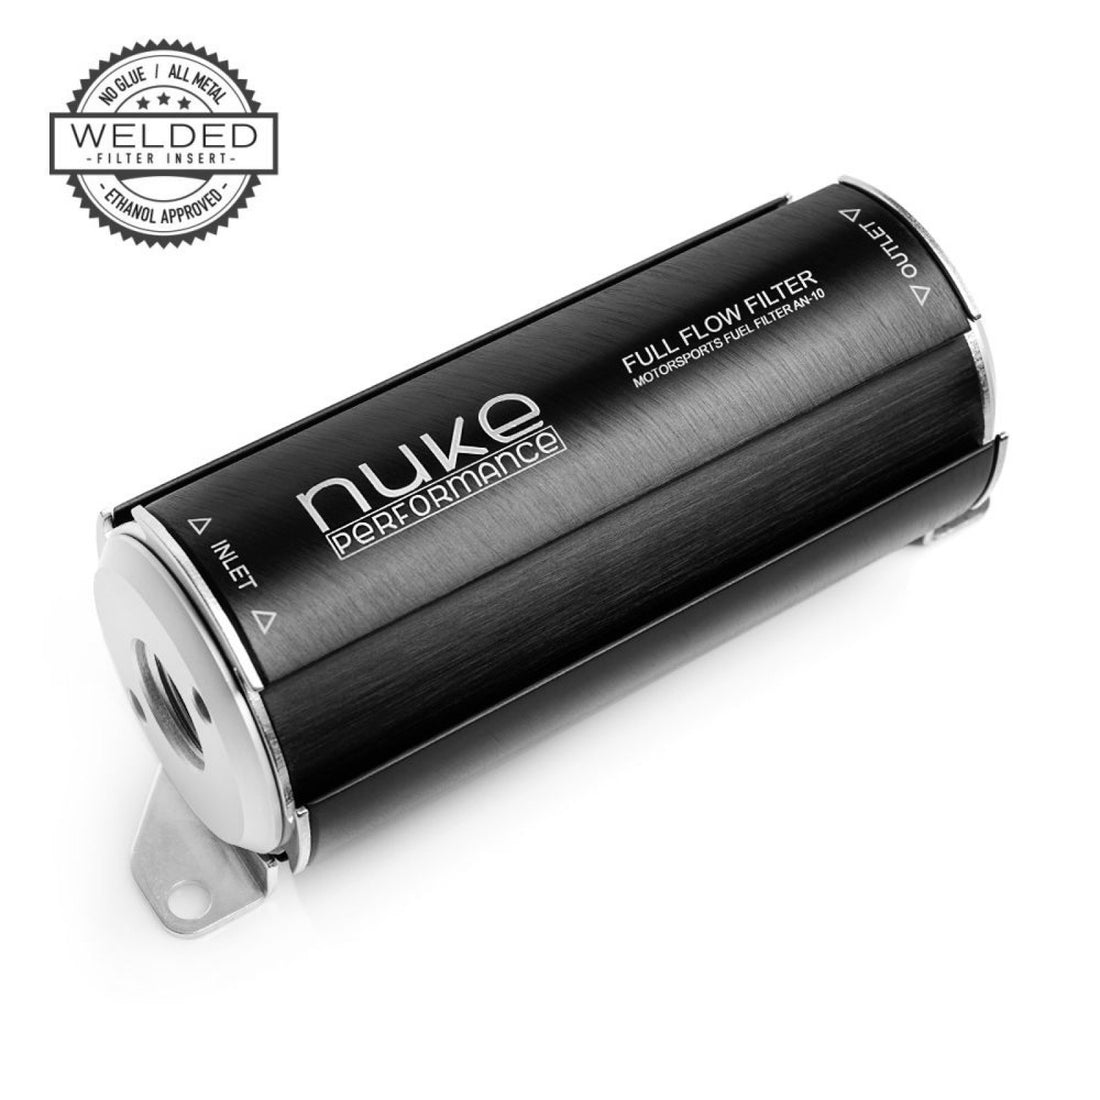 Nuke Performance Fuel Filter 100 micron AN-10 – Welded stainless steel element